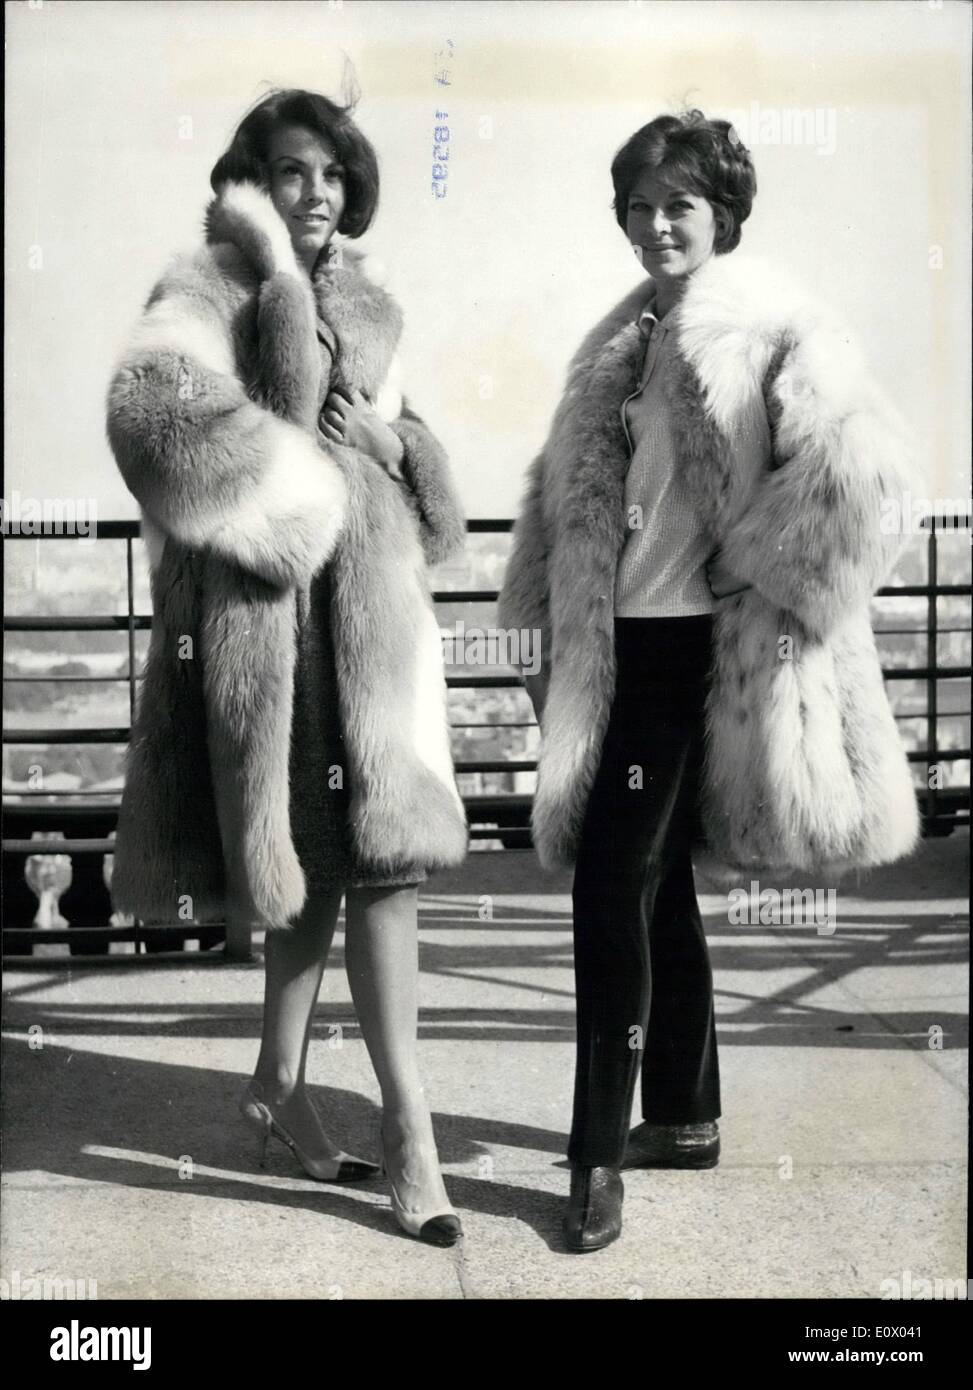 Sep. 09, 1964 - Fashion show on Eiffel Tower: The Eiffel Tower provided a background  for a winter fashion show held yesterday.Photo shows mannequins modelling winter fur coats designed by Brnswick. Stock Photo